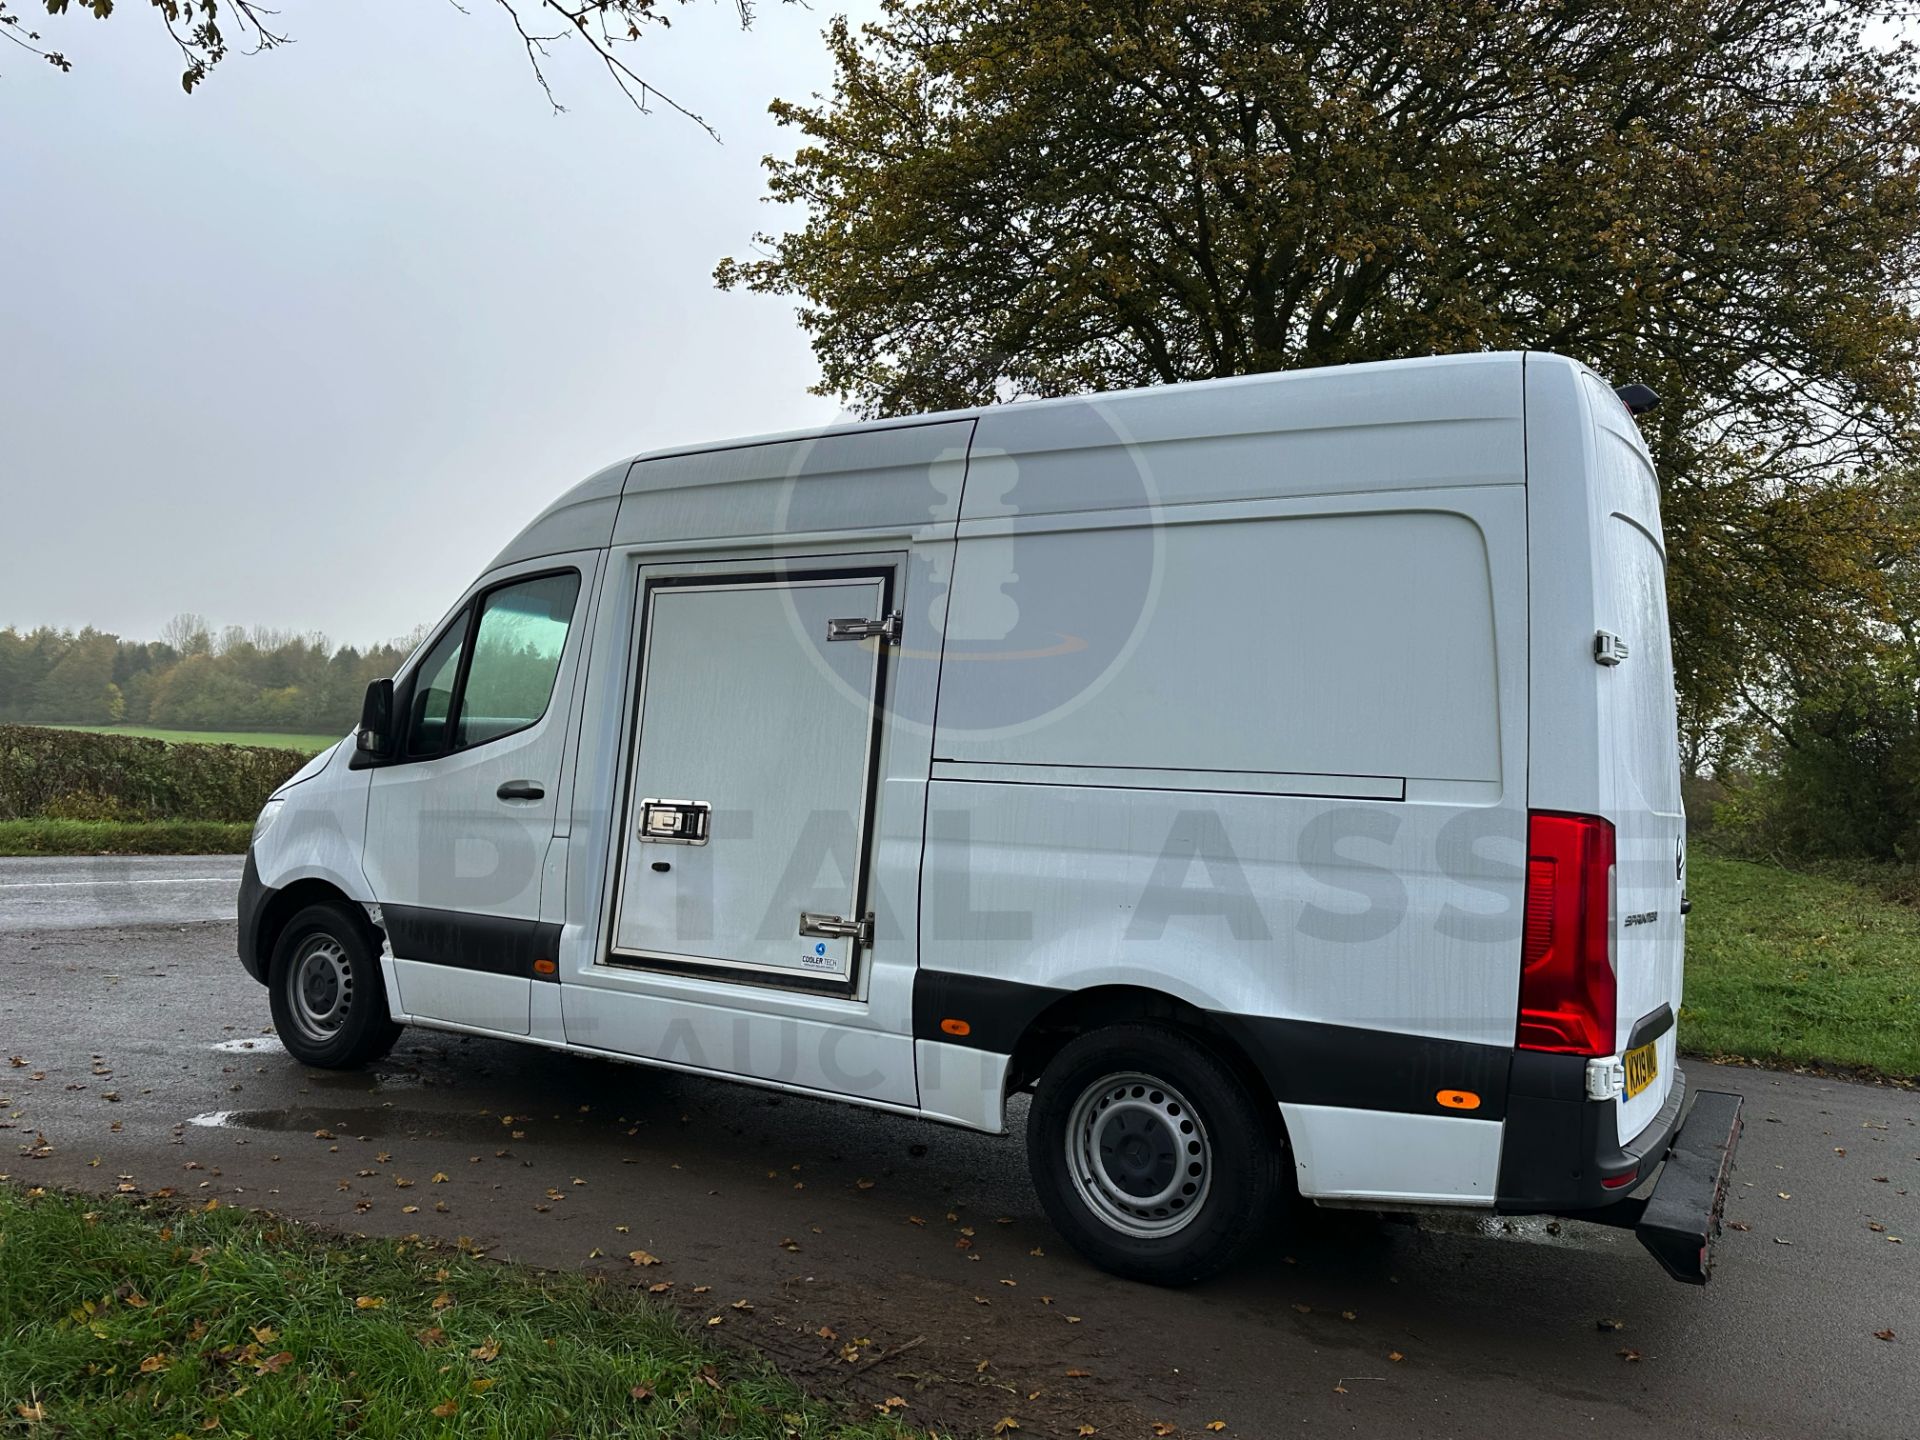 MERCEDES-BENZ SPRINTER 314 CDI *MWB - REFRIGERATED VAN* (2019 - FACELIFT MODEL) *OVERNIGHT STANDBY* - Image 9 of 45